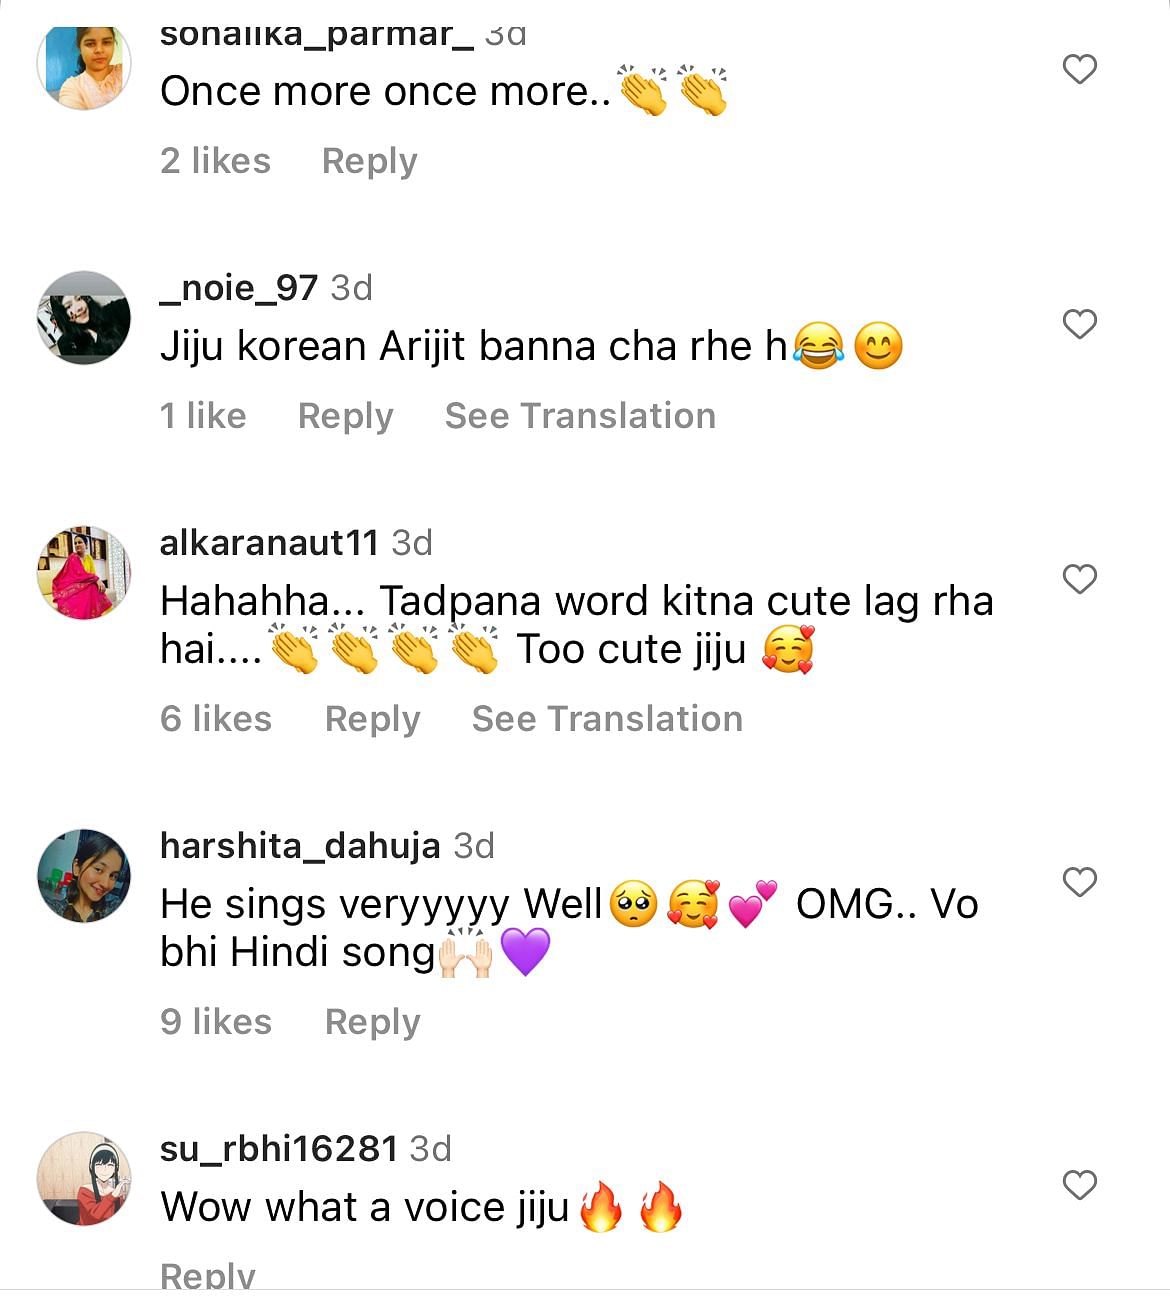 An Instagram user commented under the viral music cover, "He fails all Bollywood singers."